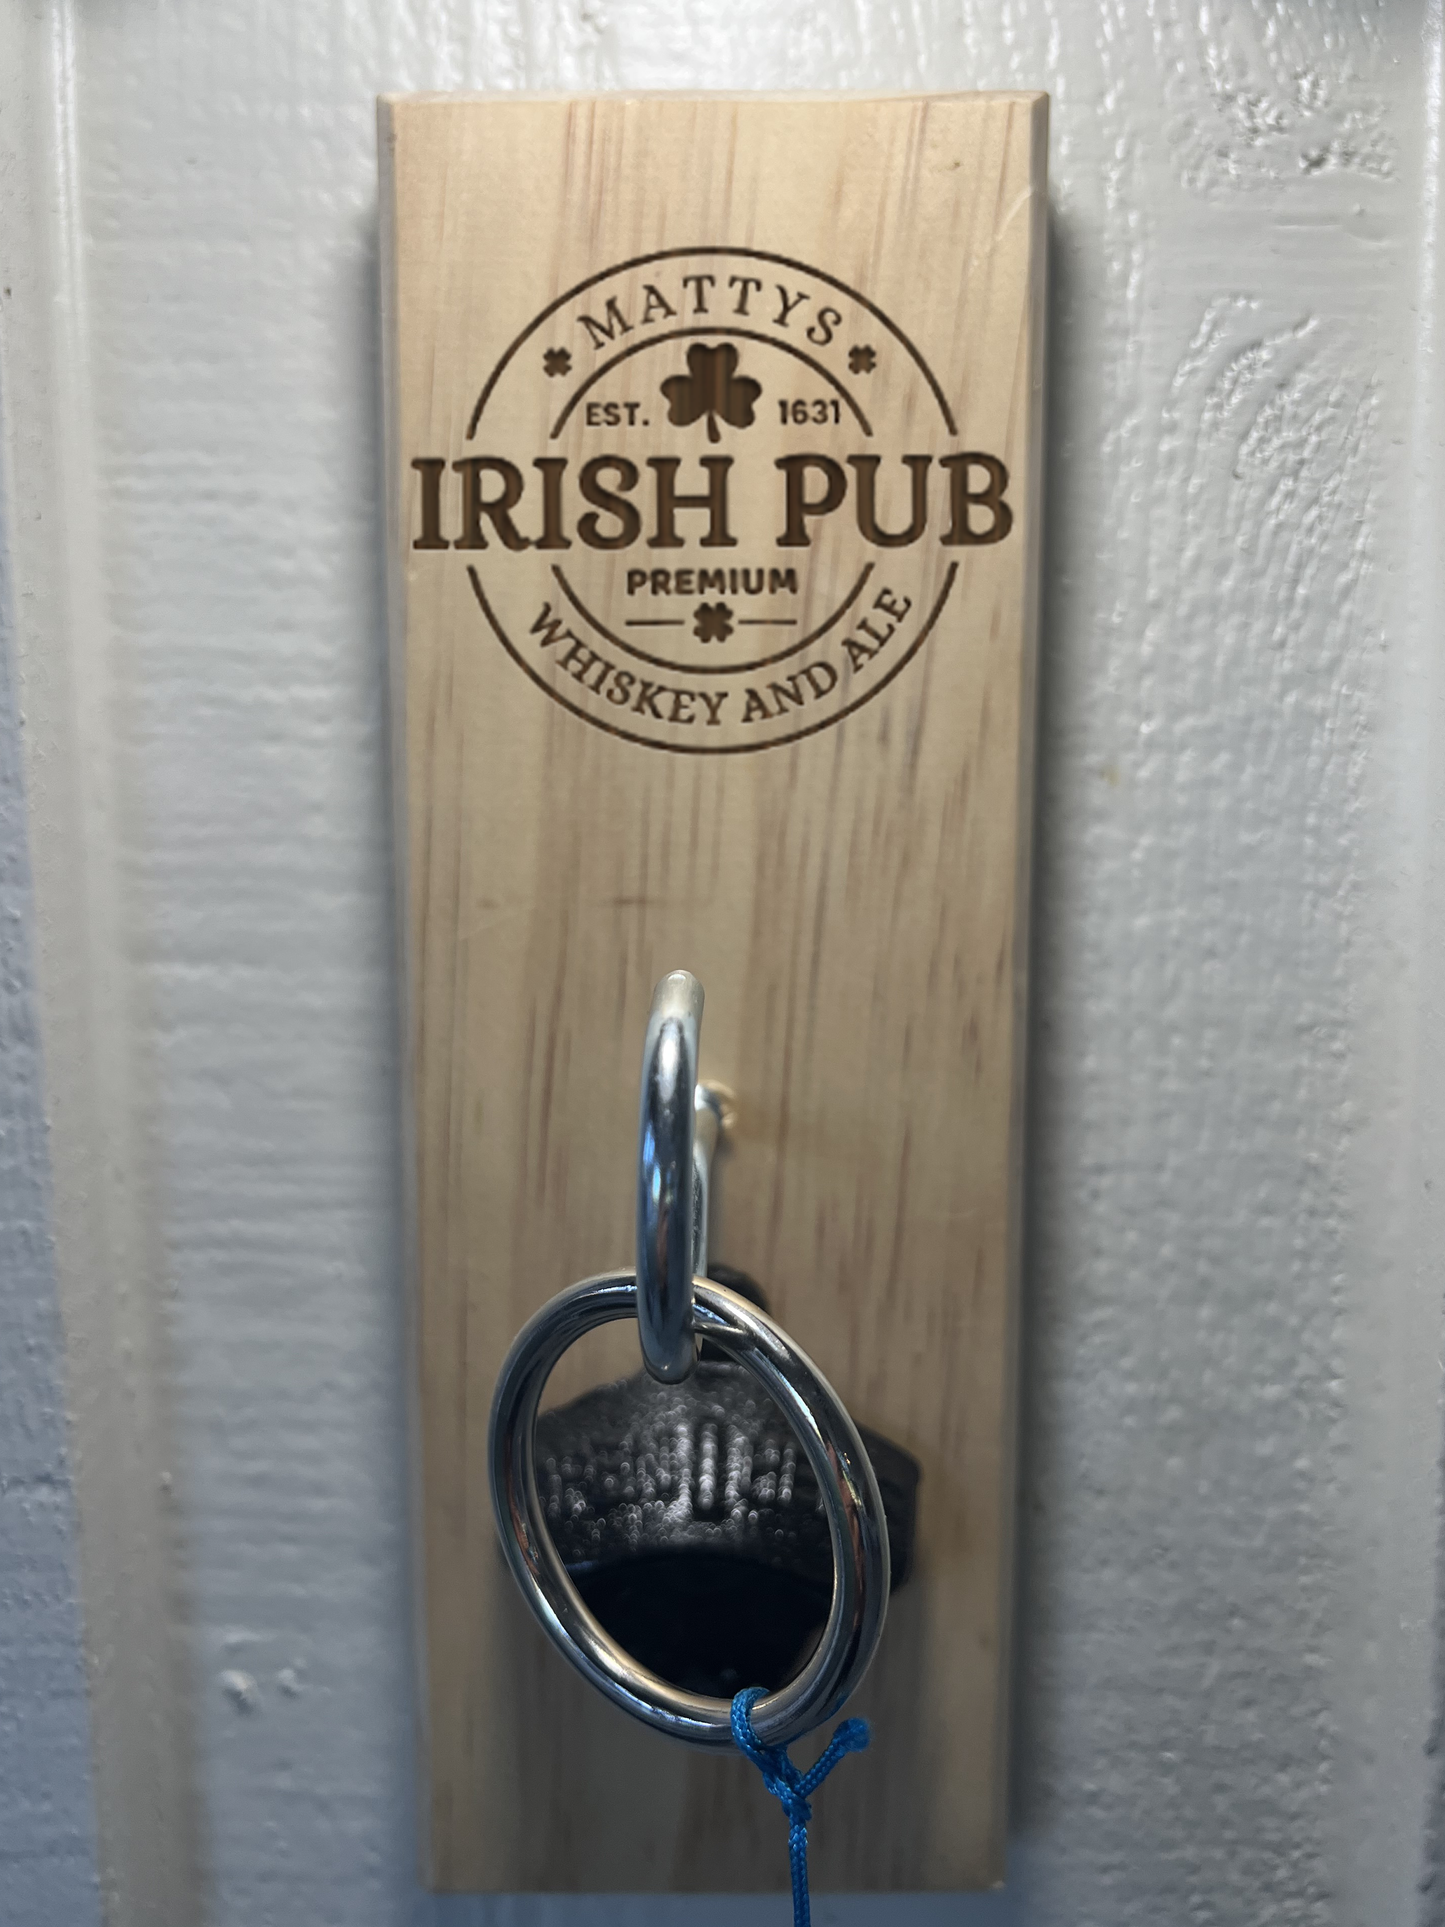 Custom Laser Engraved Ring Toss Game with Bottle Opener - Indoor/Outdoor Fun - Great Gift Idea For Groomsmen, Bars, Taverns and Bimini Fun